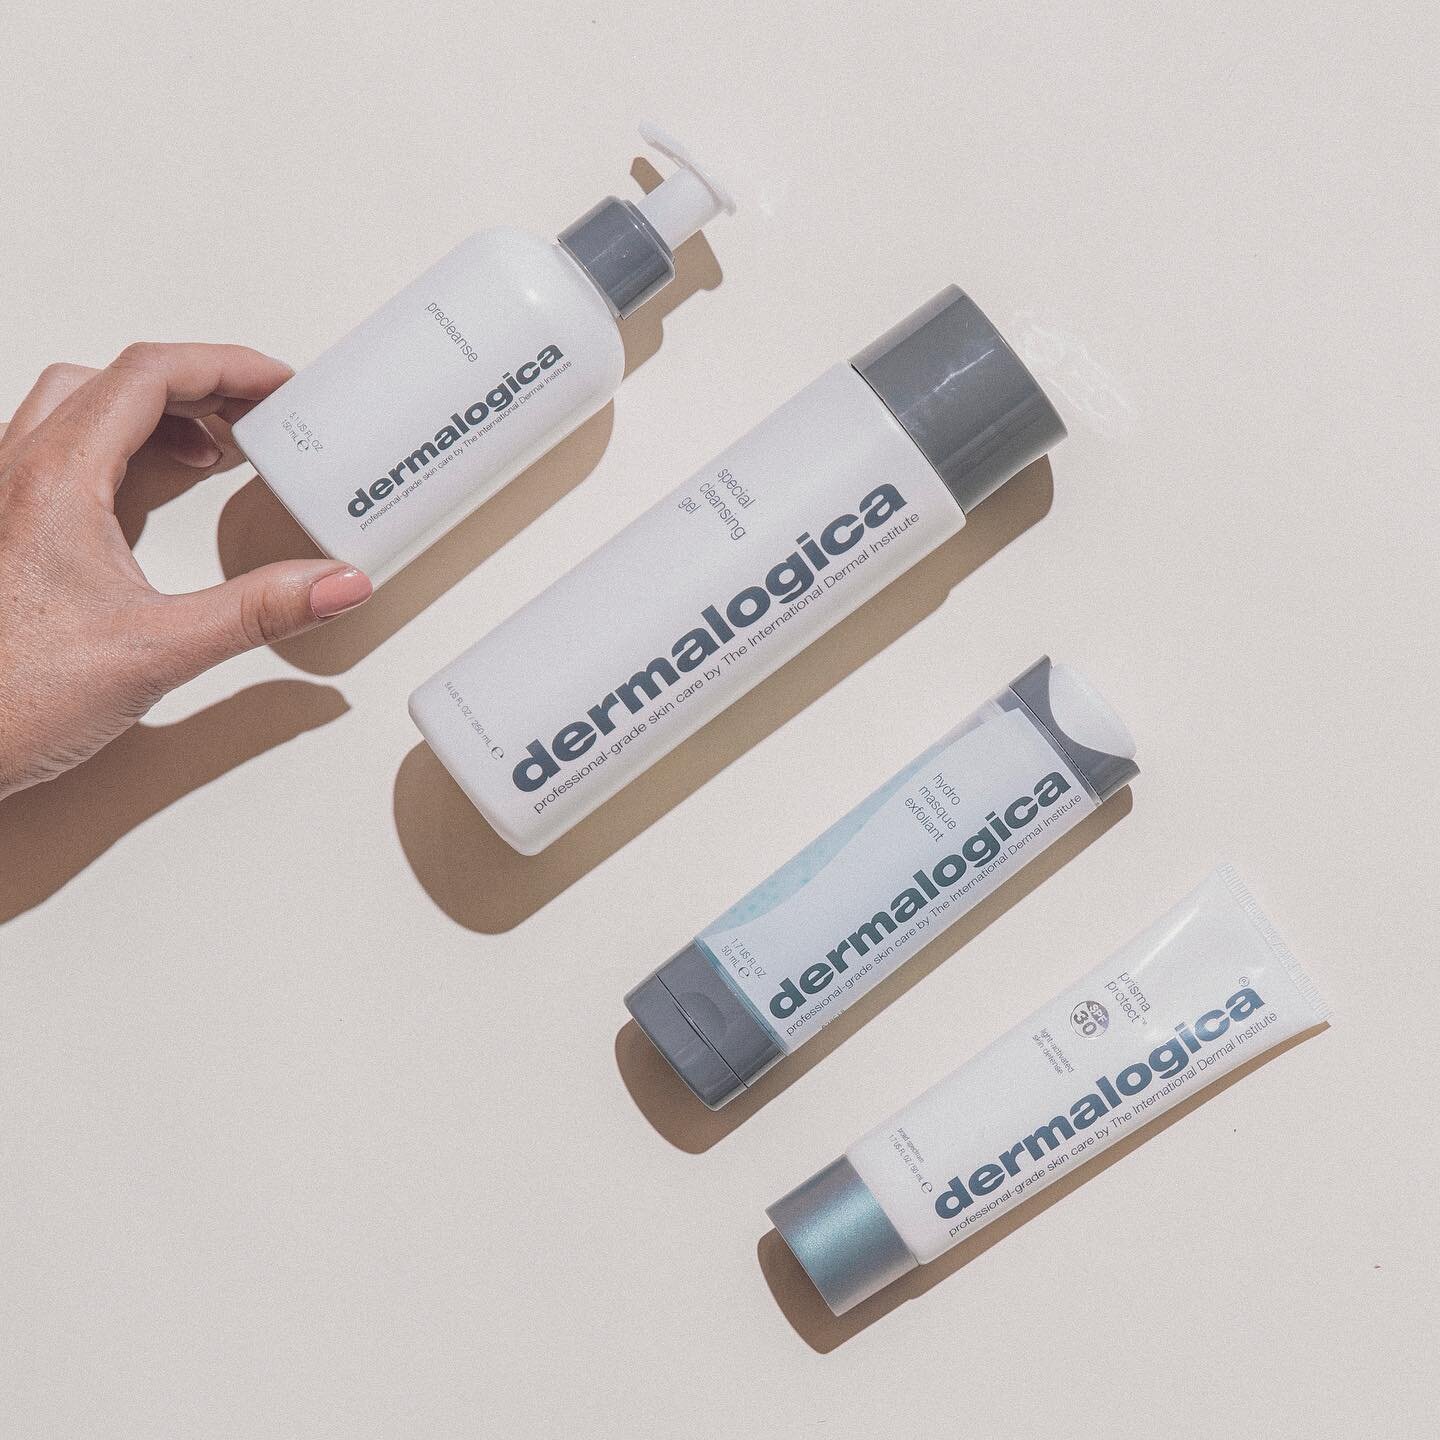 Flash SALE ends today! 20% off all Dermalogica products! Perfect time to stock up on those products you will need for warmer weather! Open 9am-2pm today!